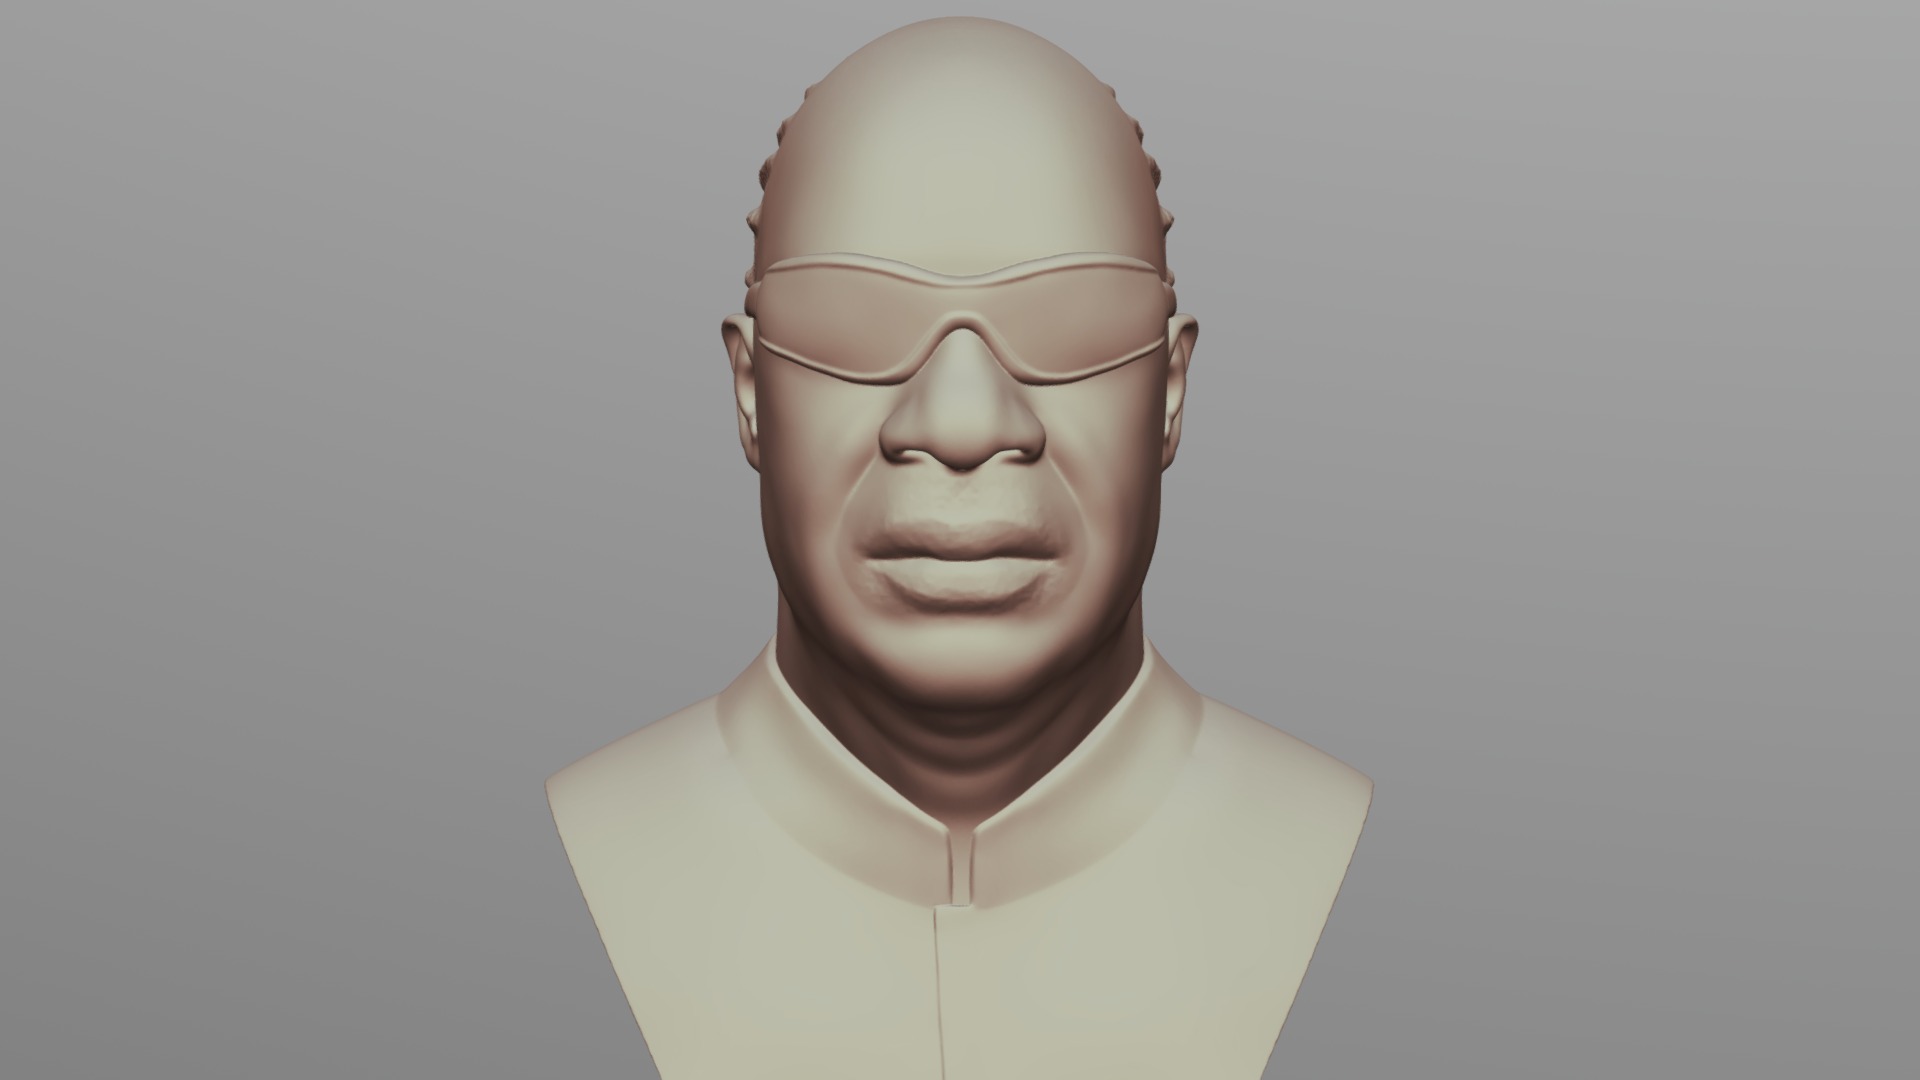 3D model Stevie Wonder bust for 3D printing - This is a 3D model of the Stevie Wonder bust for 3D printing. The 3D model is about a man wearing glasses.